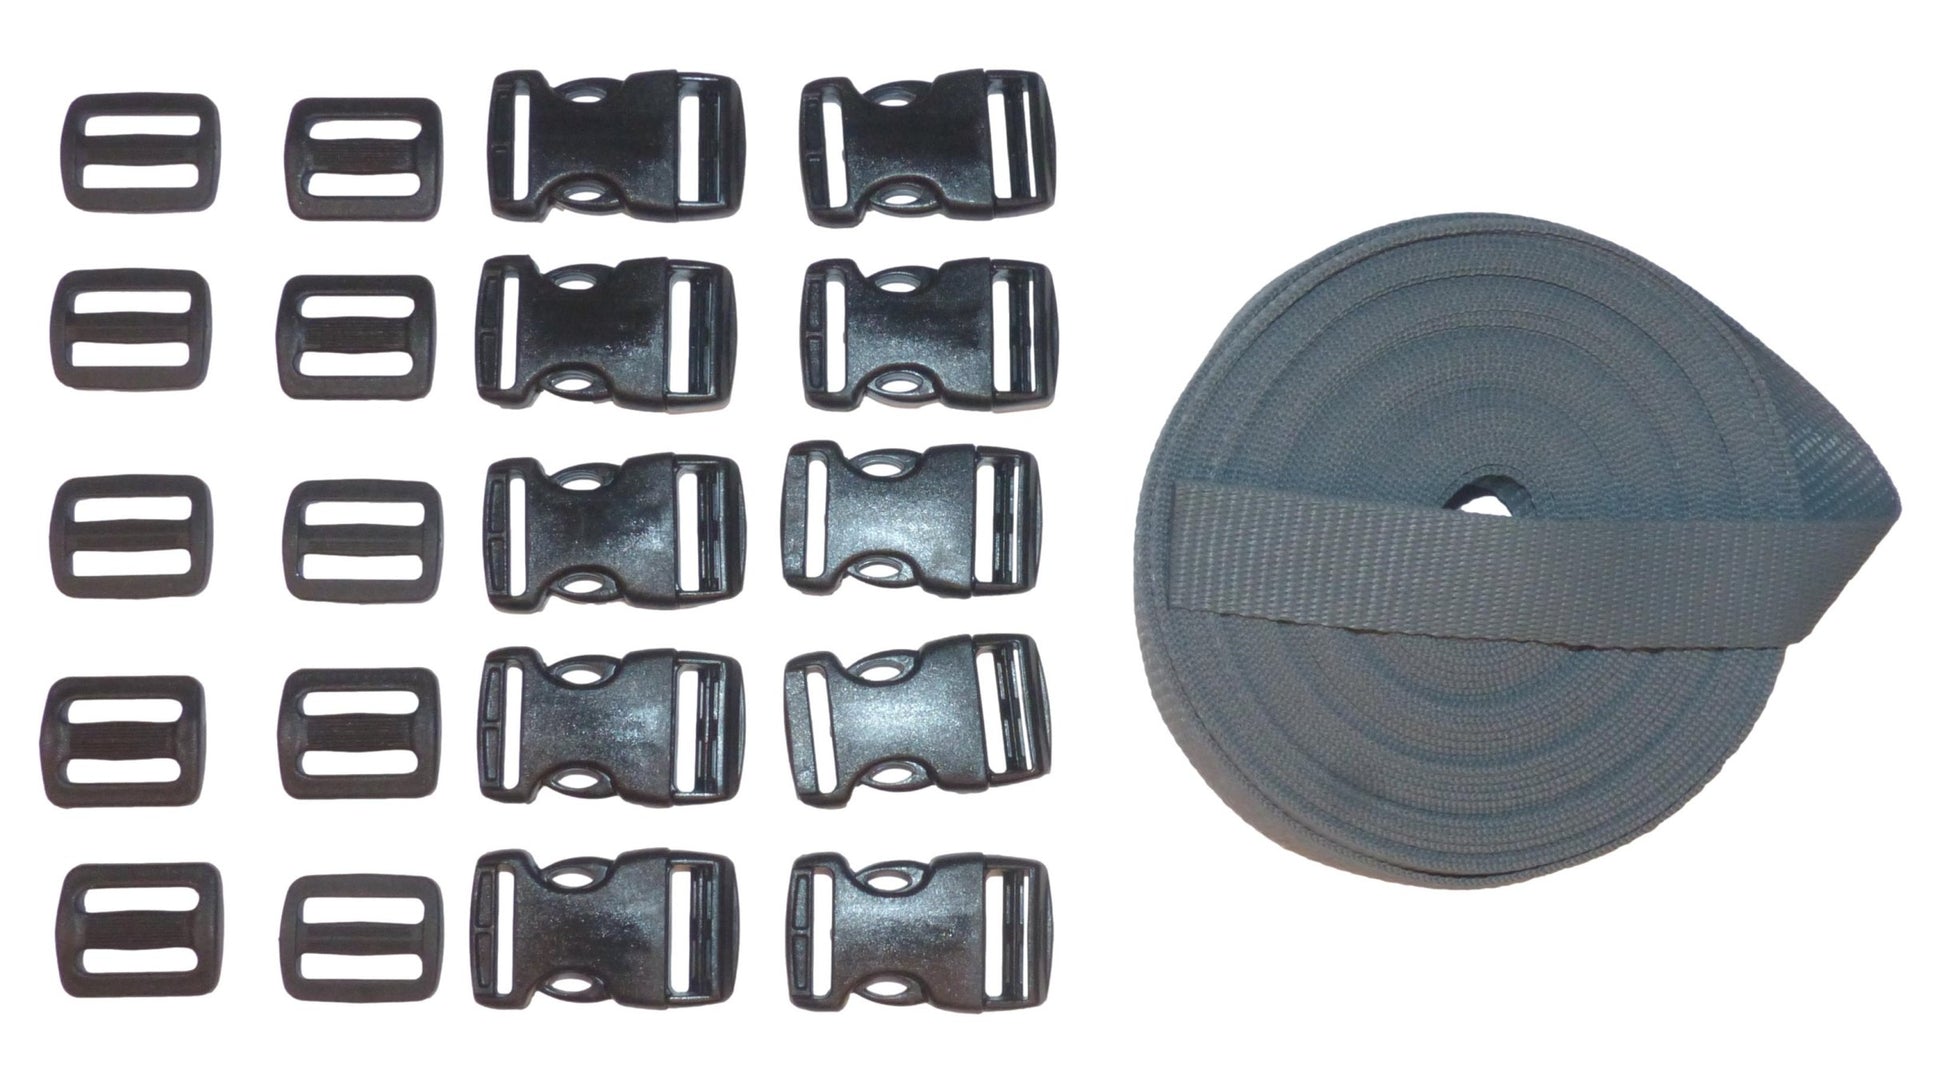 Benristraps 25mm Heavy-Duty Webbing and Branded  Buckle Sets for Straps, Bags, Crafts in grey